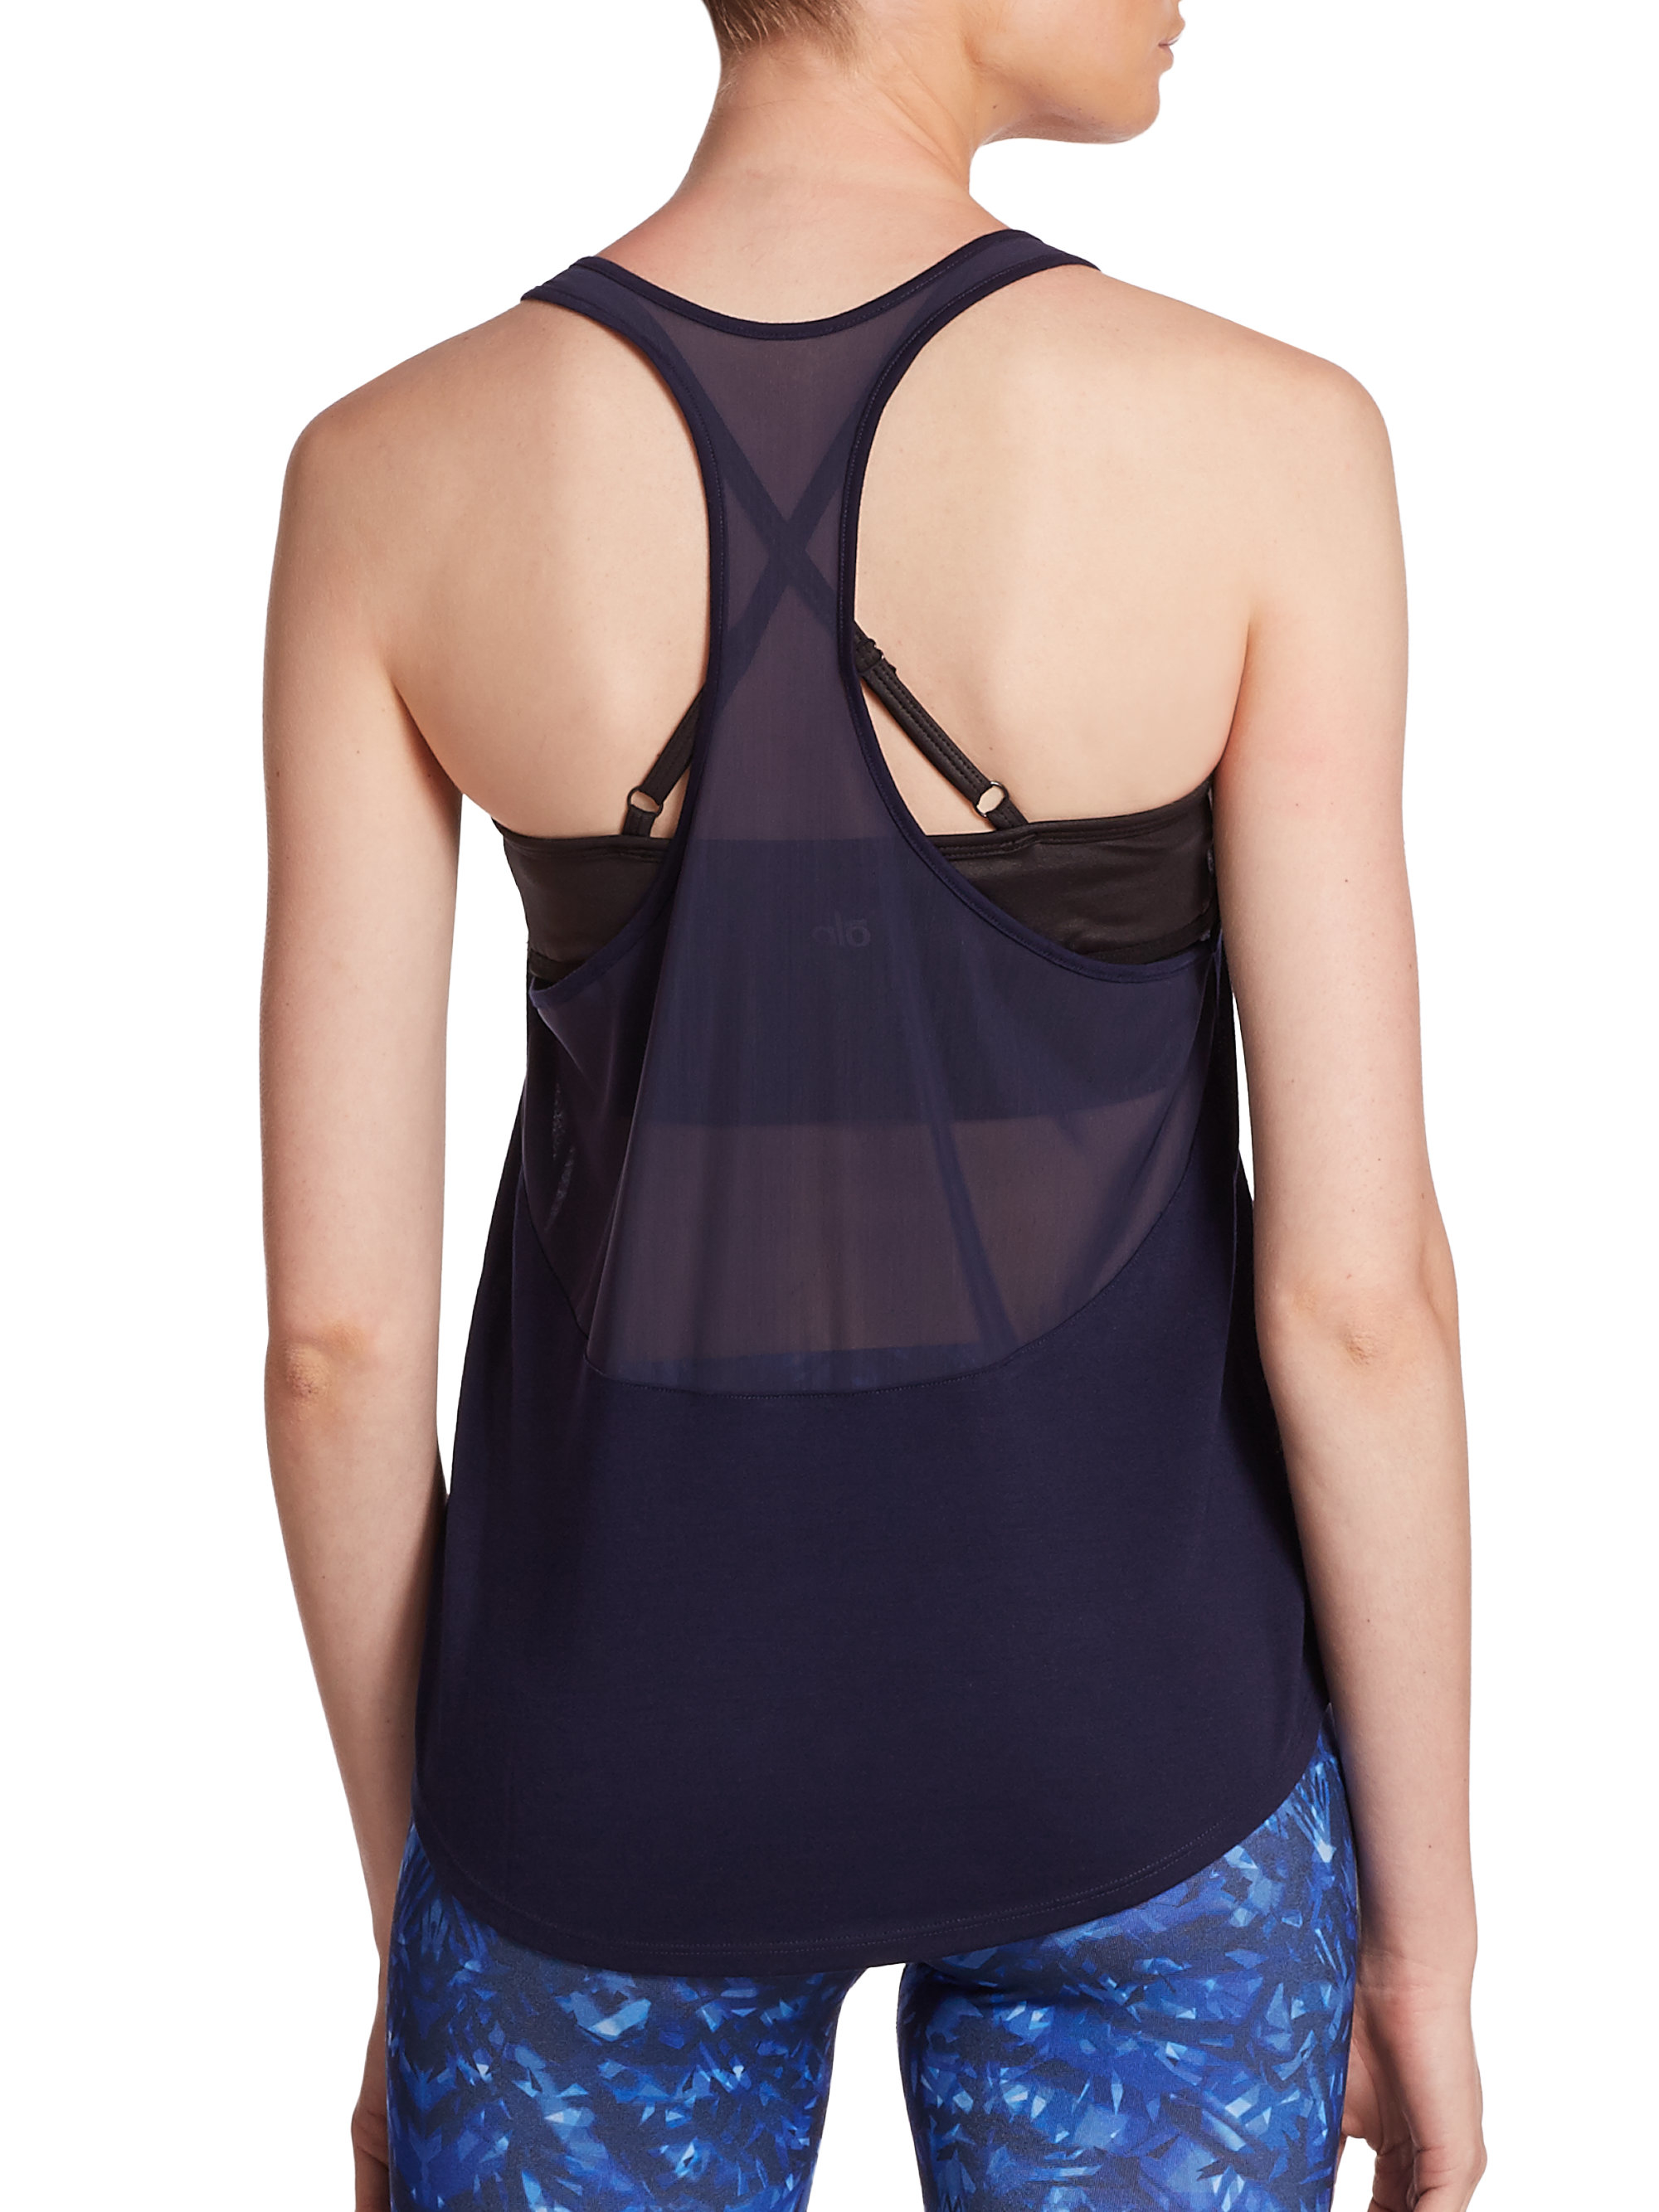 Lyst - Alo Yoga Extreme Racerback Tank Top in Blue